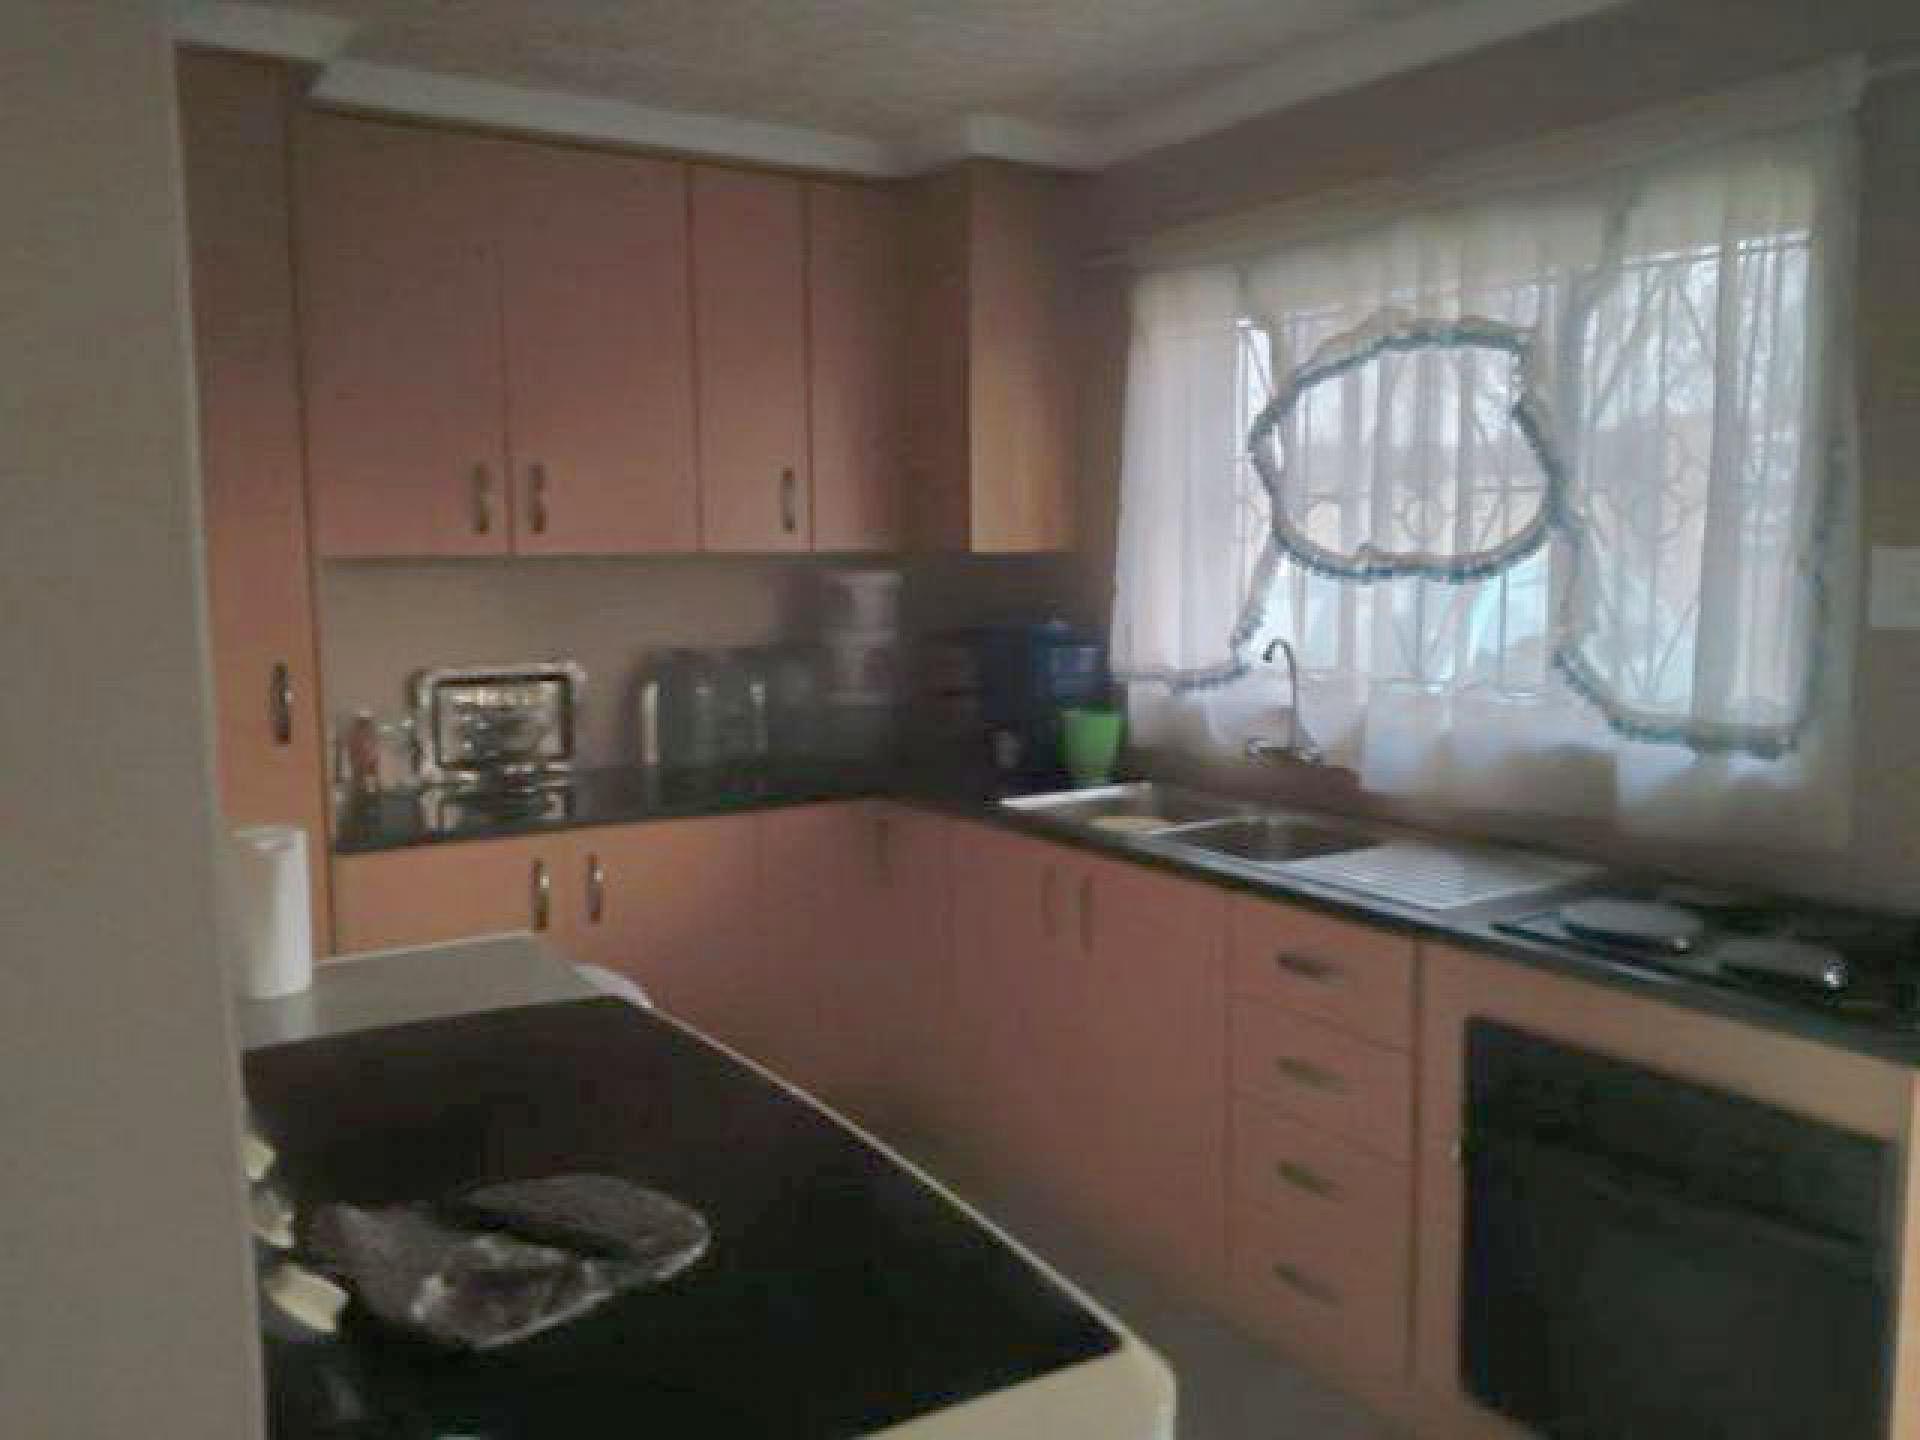 Kitchen of property in Kinross